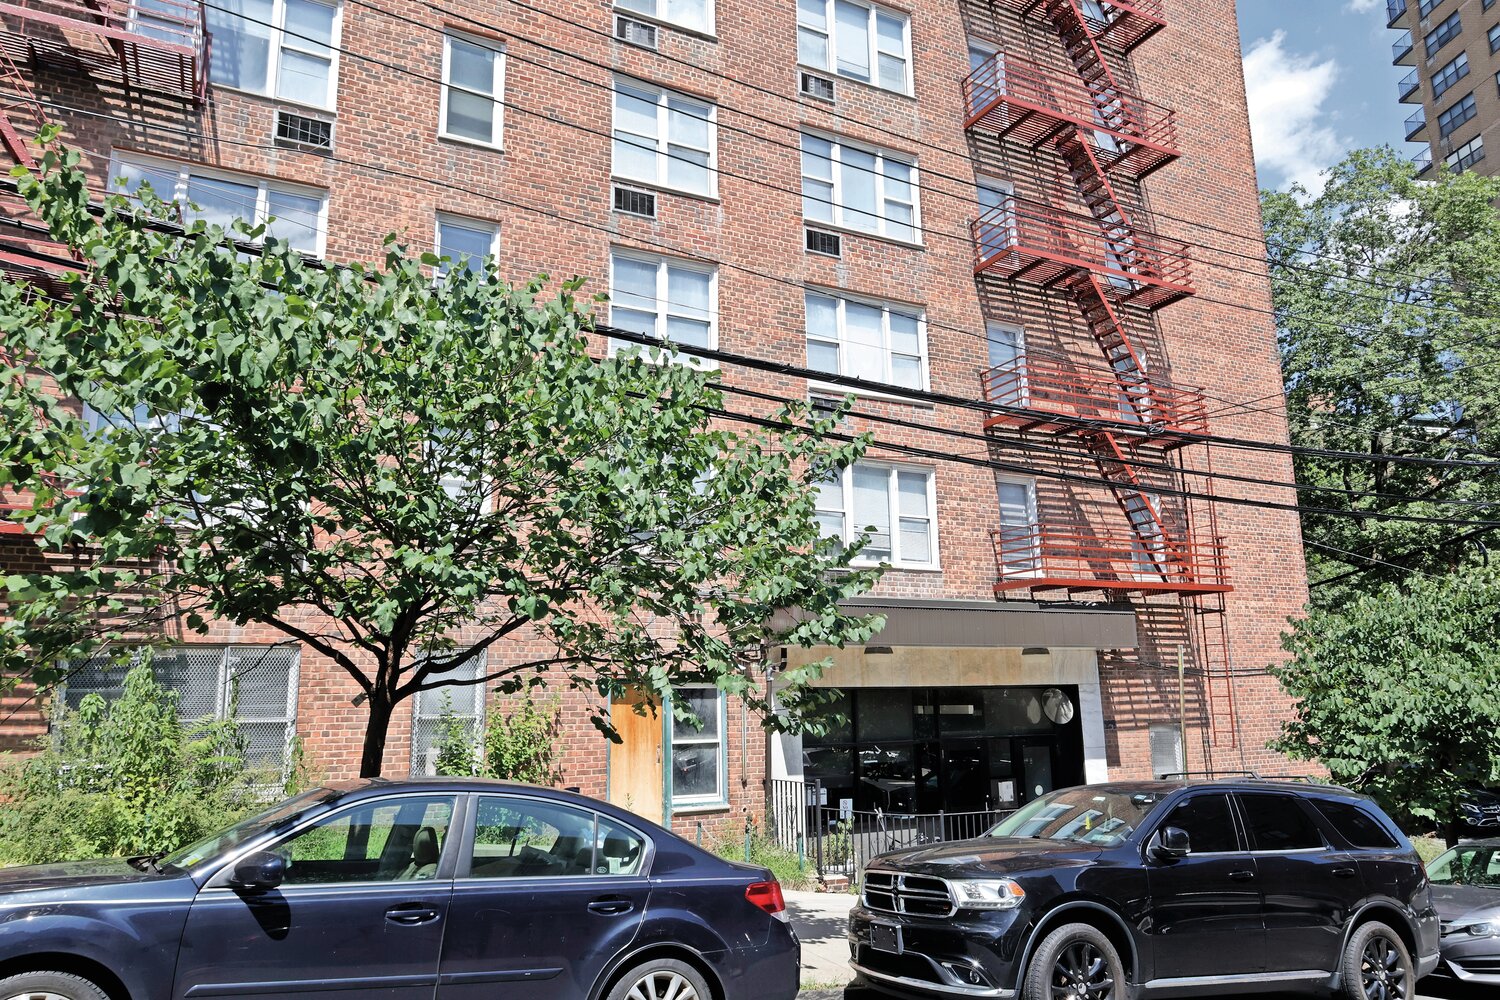 The Stagg Group purchased Manhattan College’s former Overlook Manor earlier this year. It has long been speculated by some that the building would be used as a shelter for asylum-seekers.